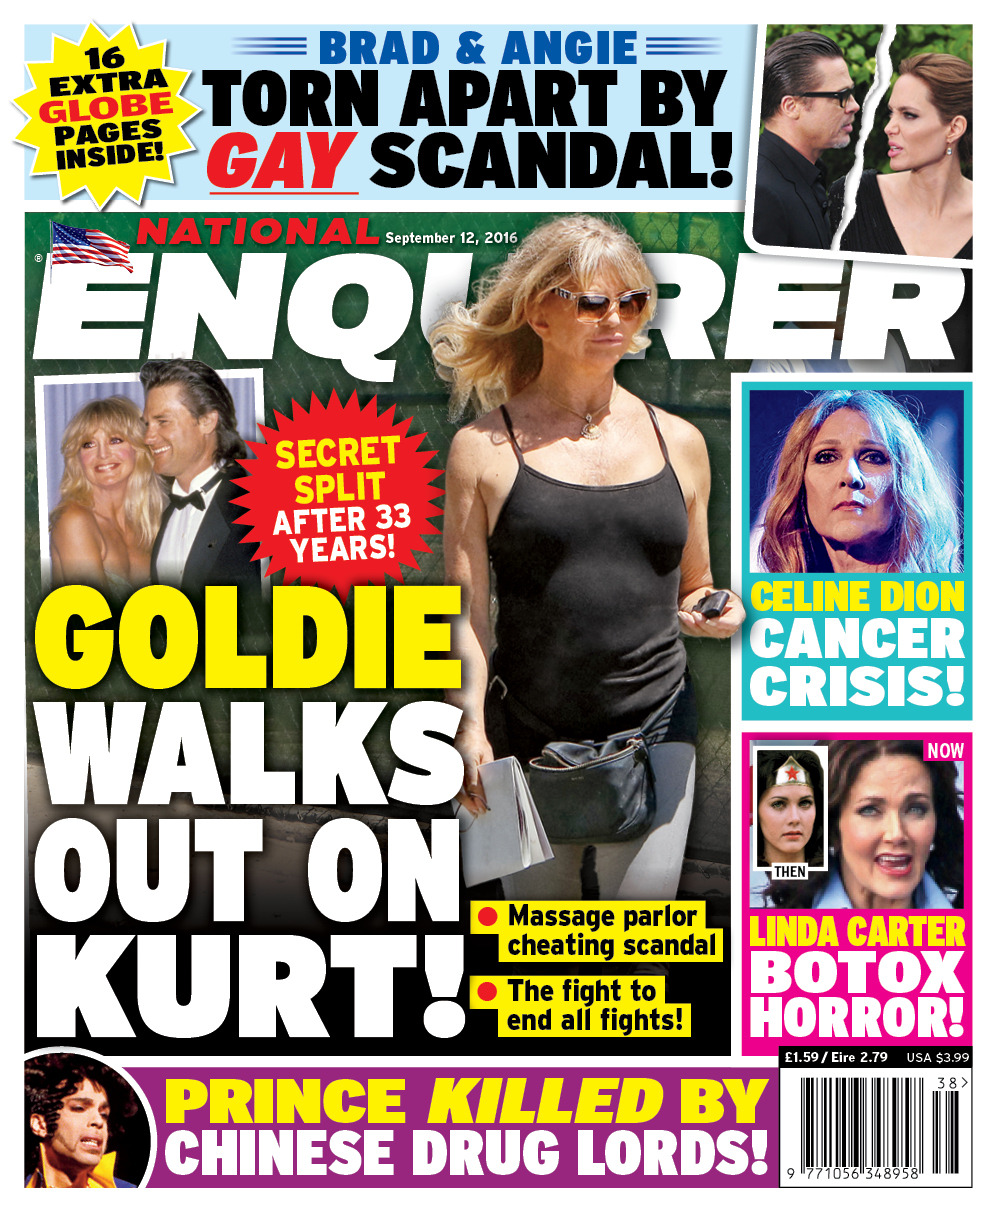 Goldie Walks Out On Kurt! Secret split after 33 years after massage parlor cheating scandal and the fight to end all fights, read all about it in the latest issue of the National Enquirer on sale now, go here to find your nearest stockist